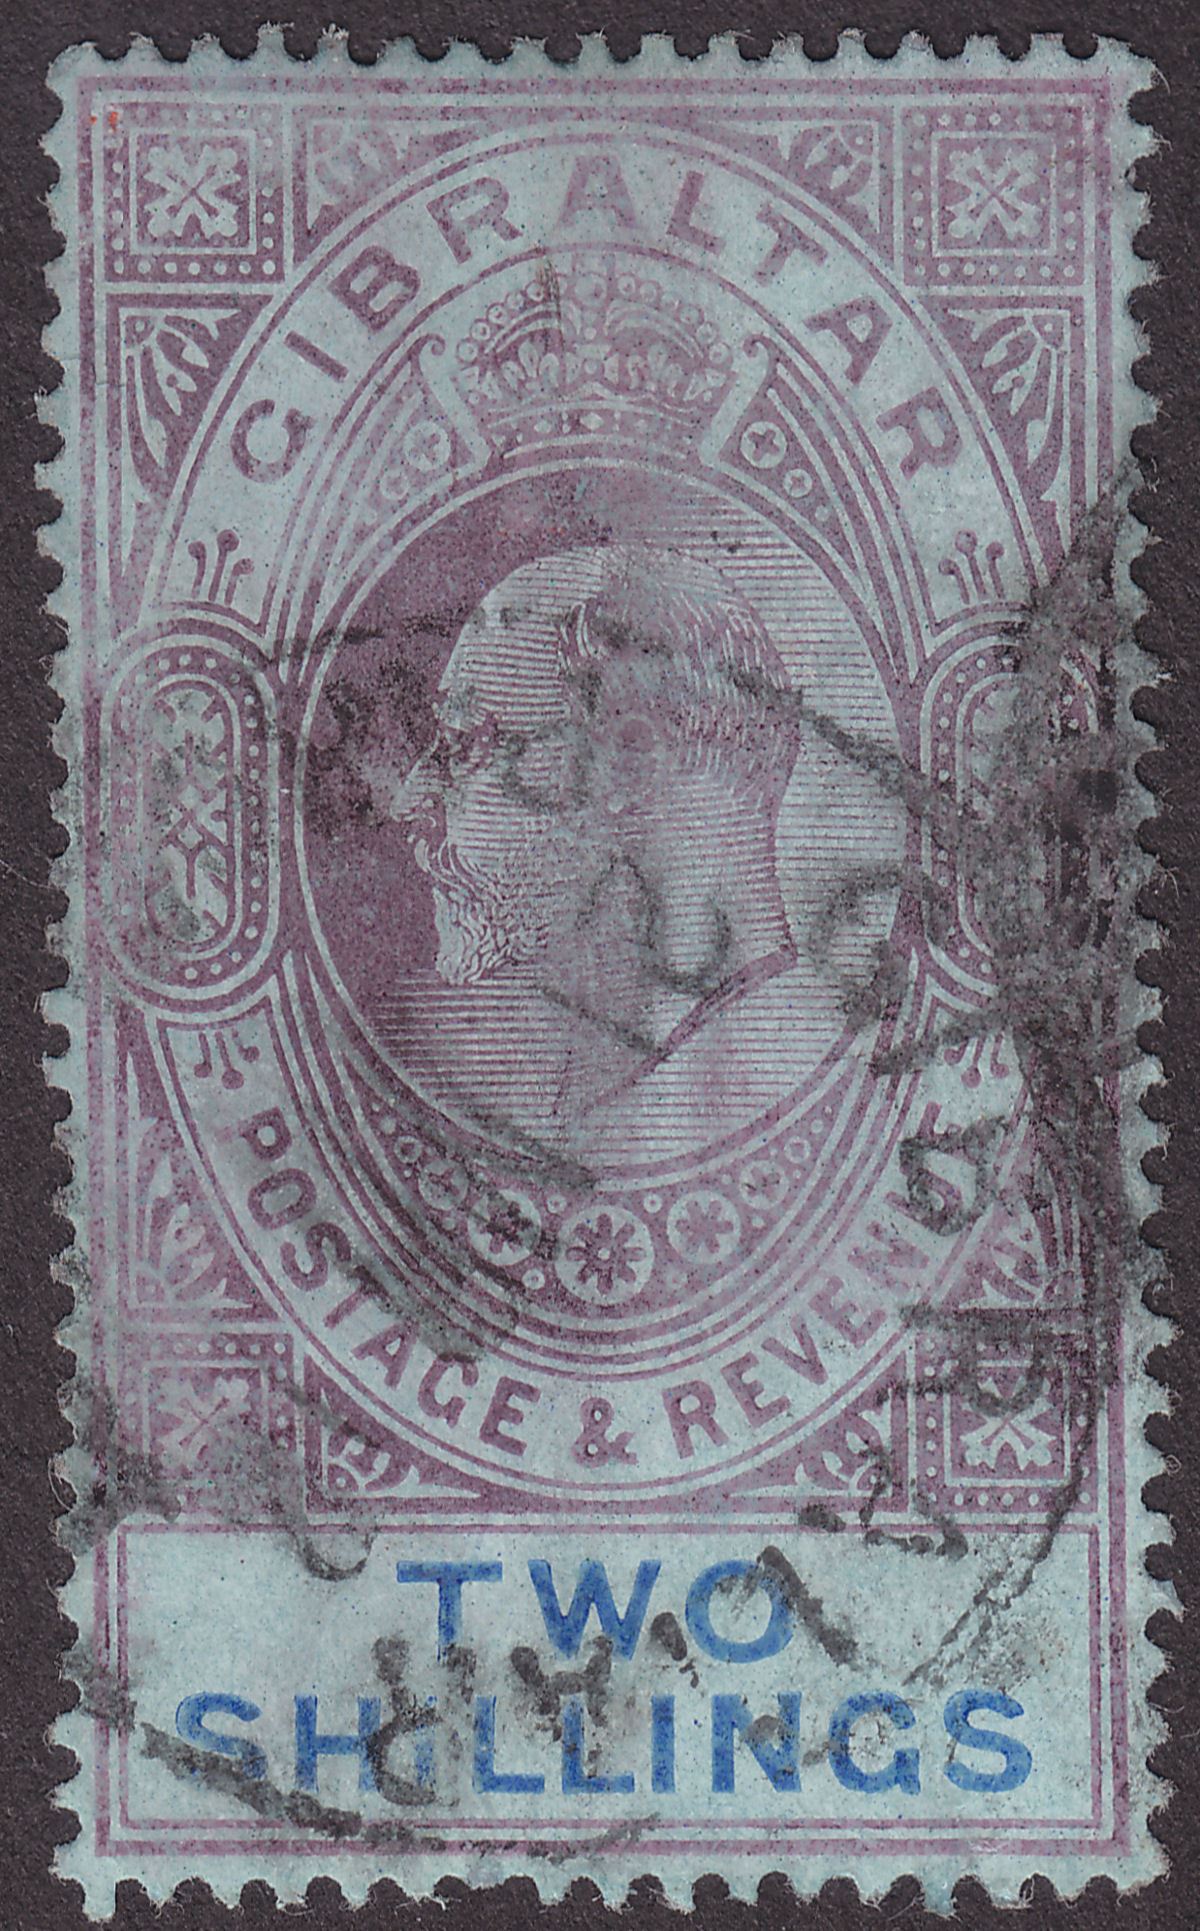 Gibraltar 1910 KEVII 2sh Purple and Bright Blue on Blue Used SG72 cat £50 rubbng